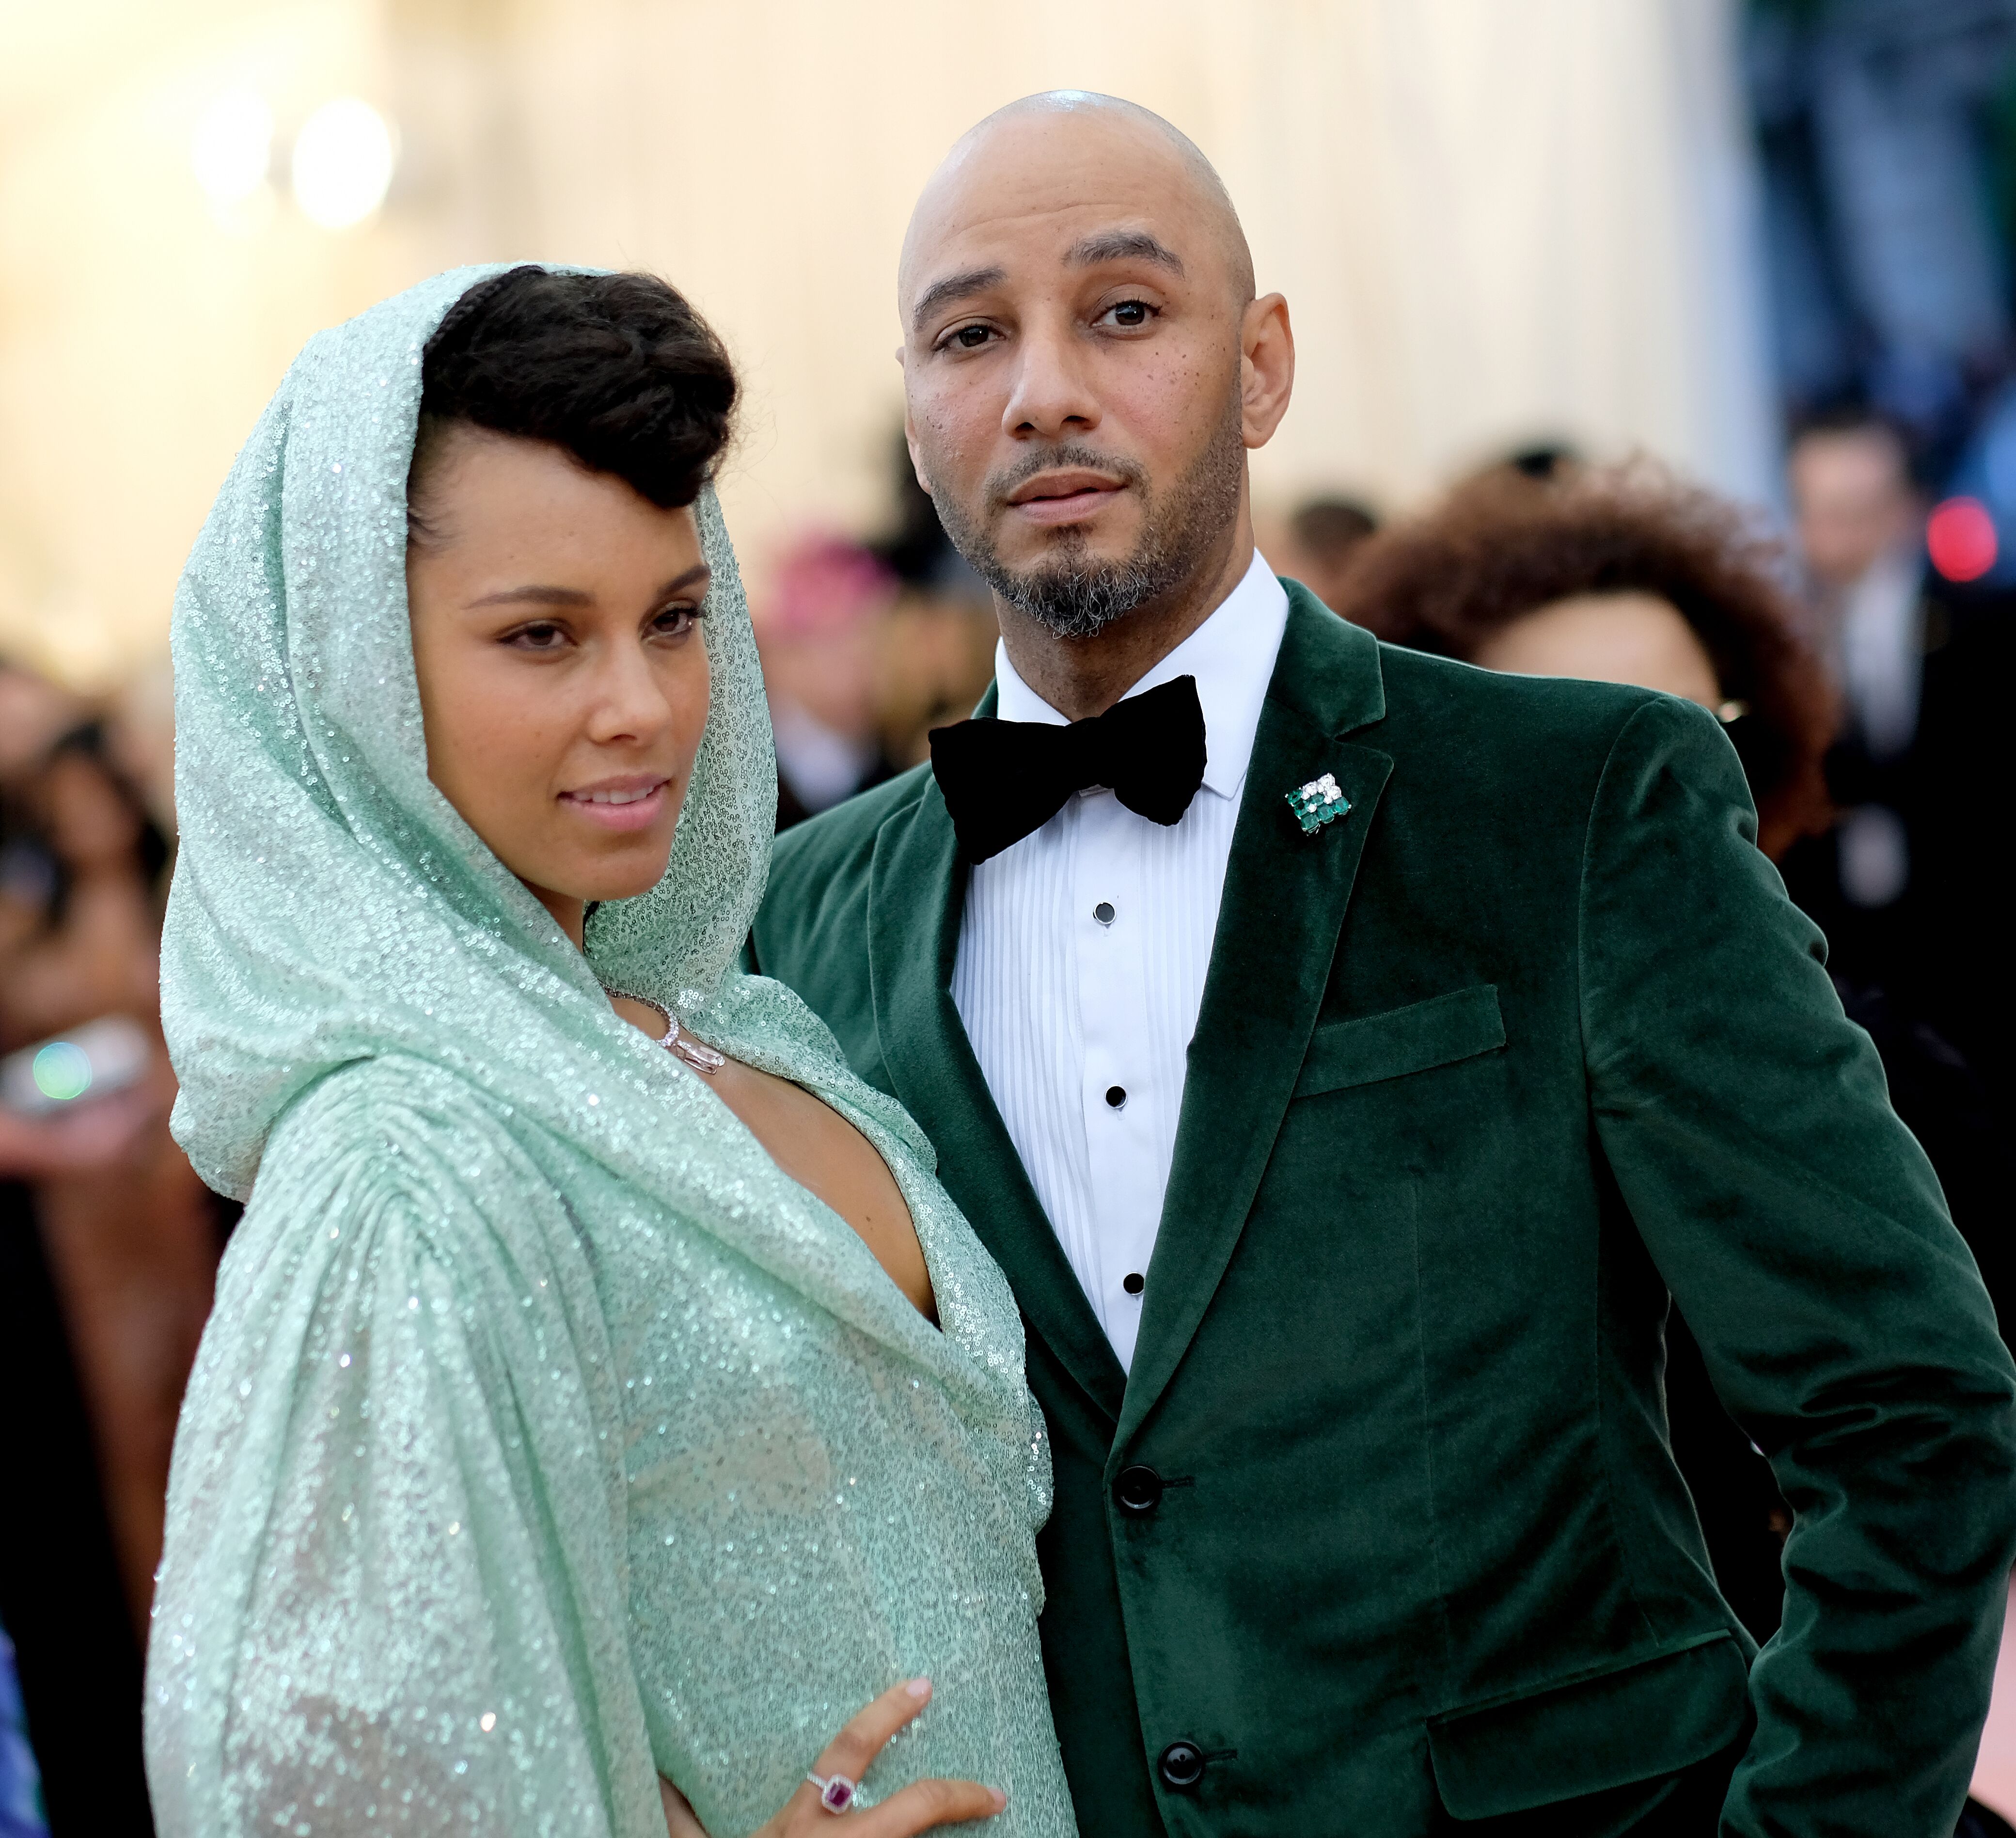 Alicia Keys and Swizz Beatz at the 2019 Met Gala at the Metropolitan Museum of Art in 2019 | Source: Getty Images 